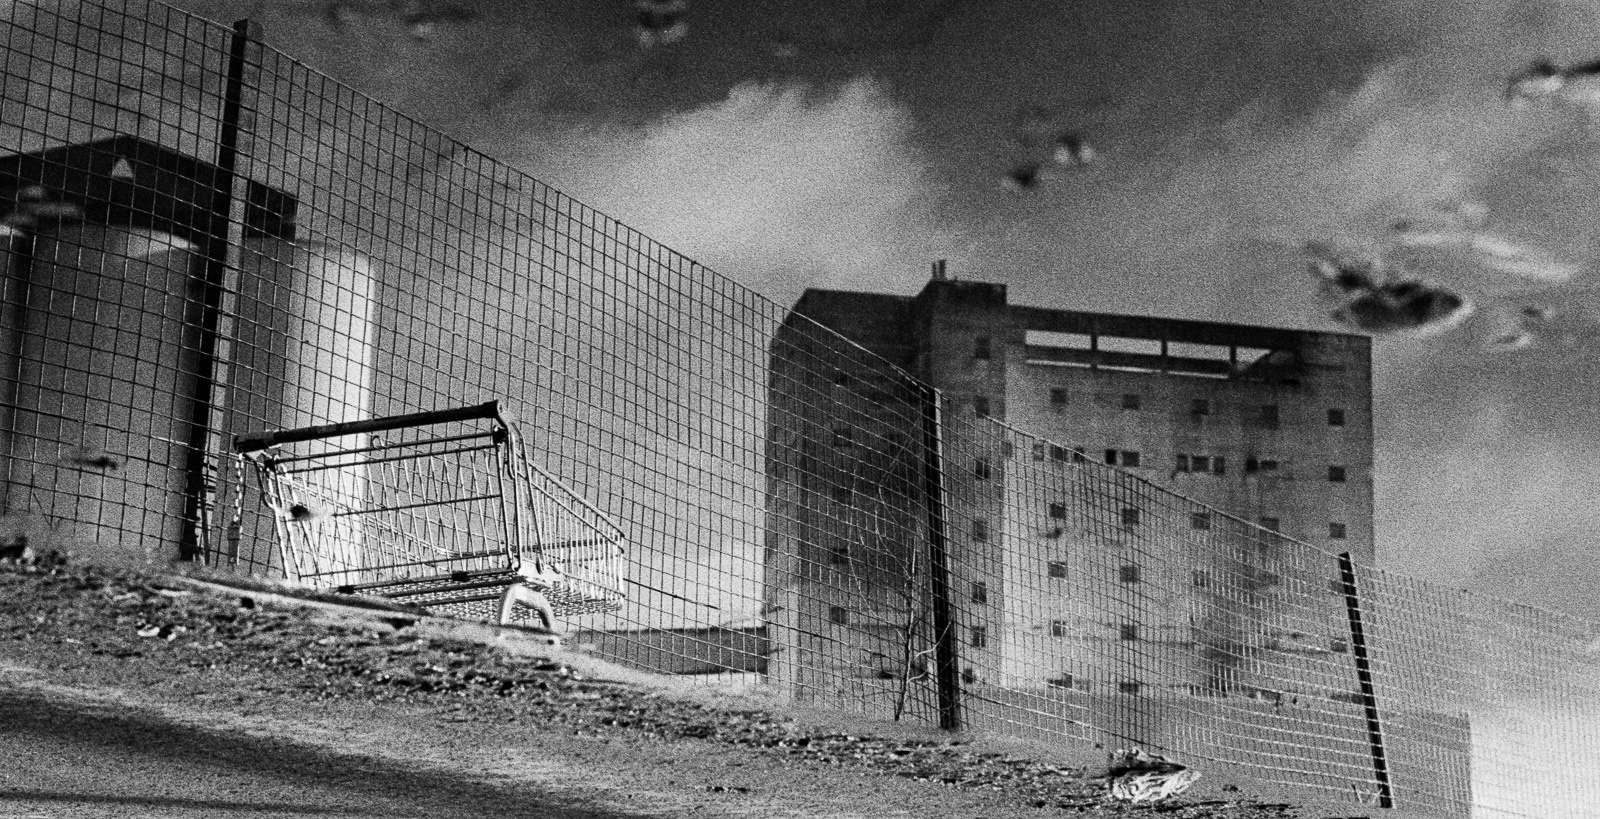 A black and white photograph showing a distorted reflection of a building and a fence in a puddle, with a shopping cart lying on its side partially submerged in water. The sky and clouds appear in the background, inverted due to the reflection.